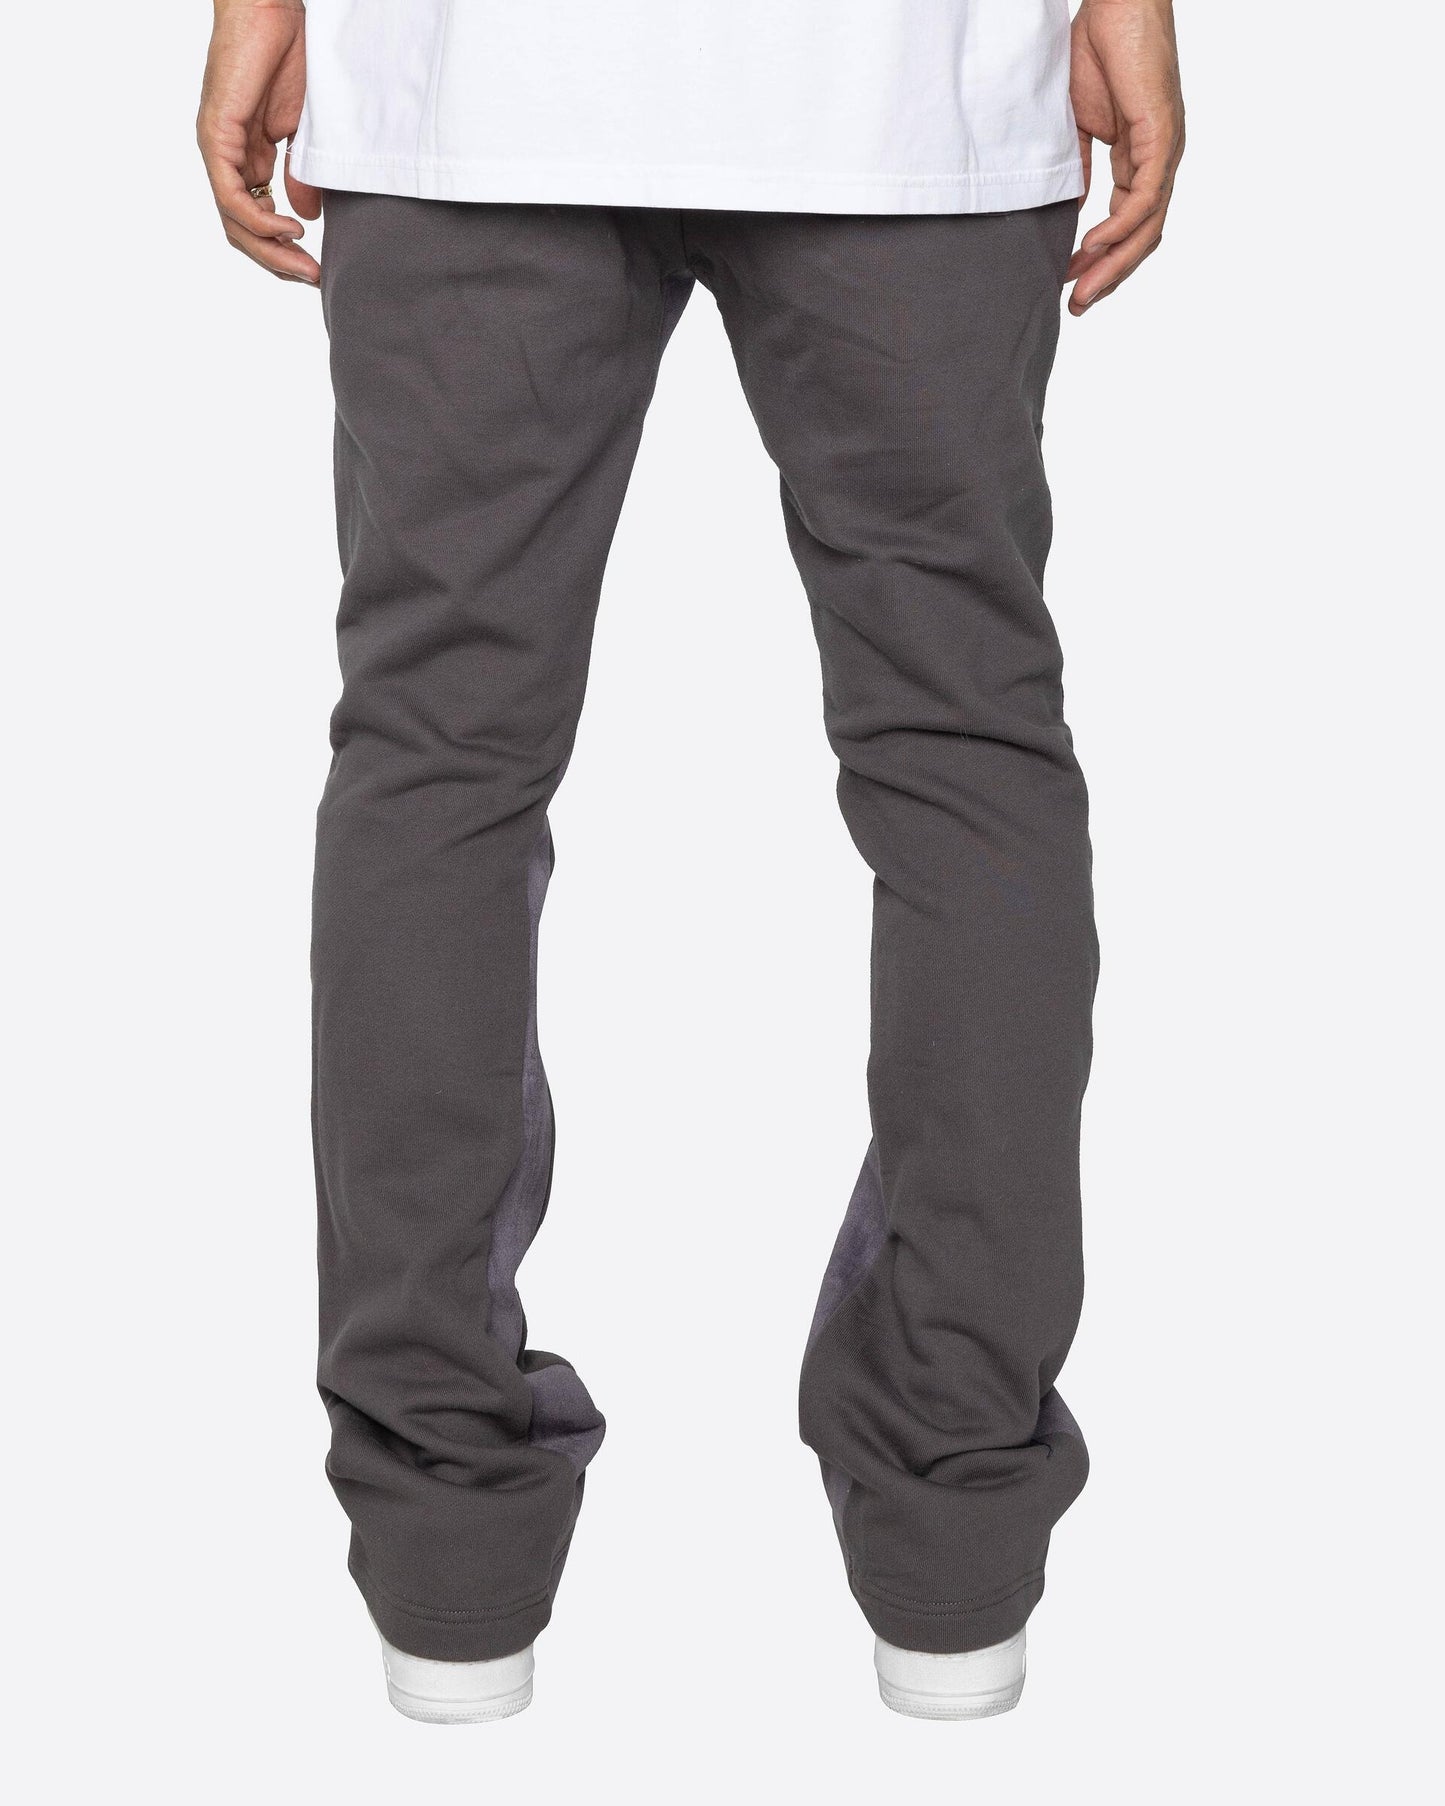 Clubhouse Pants (Charcoal)